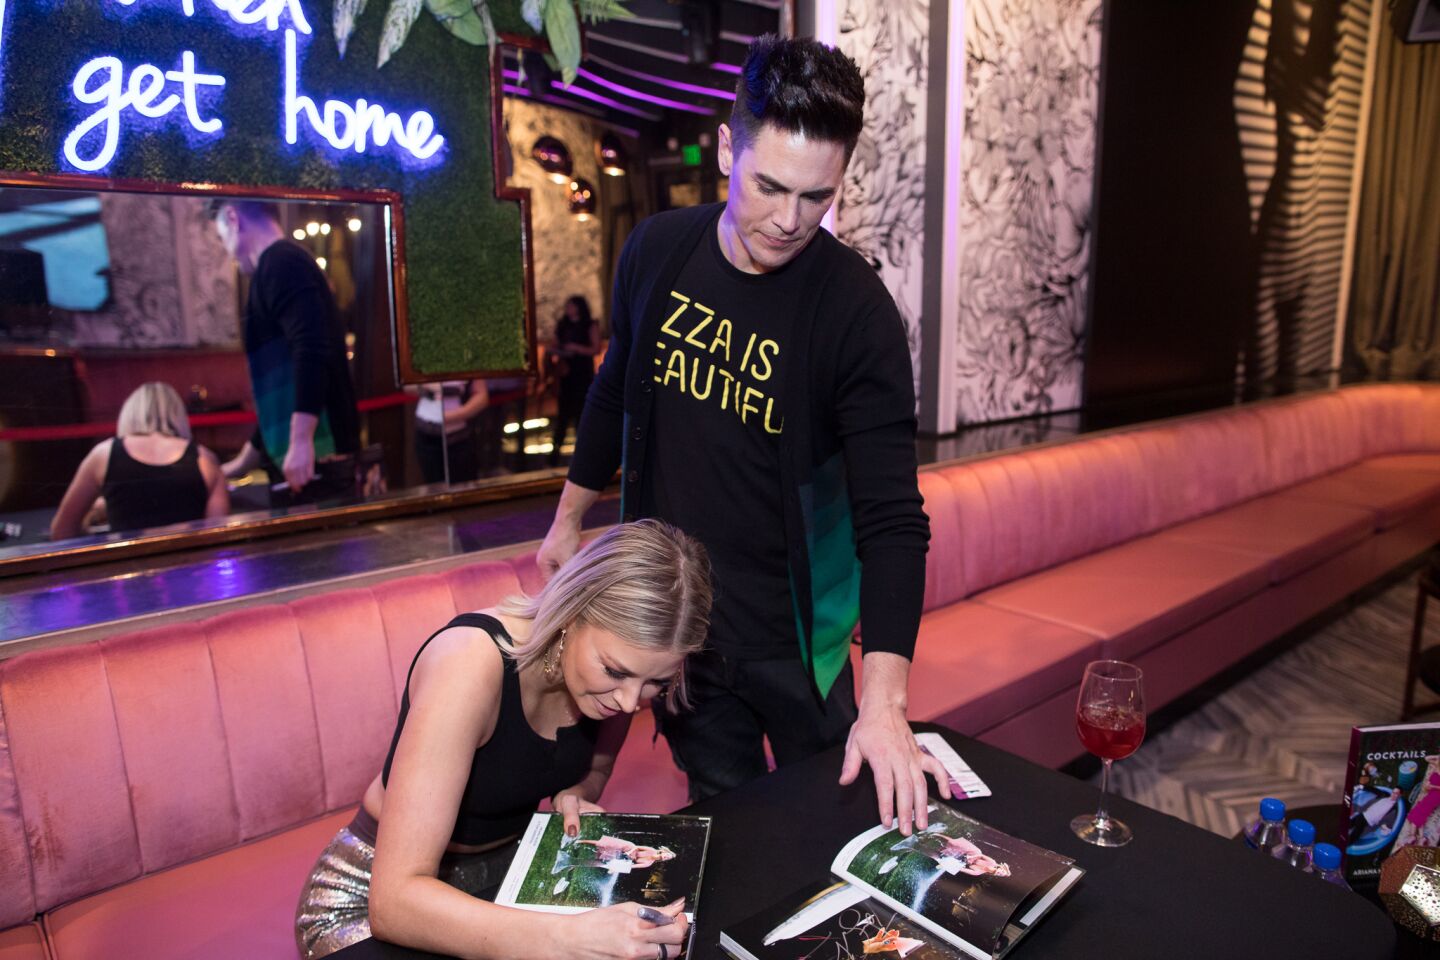 Book signing with Tom Sandoval and Ariana Madix